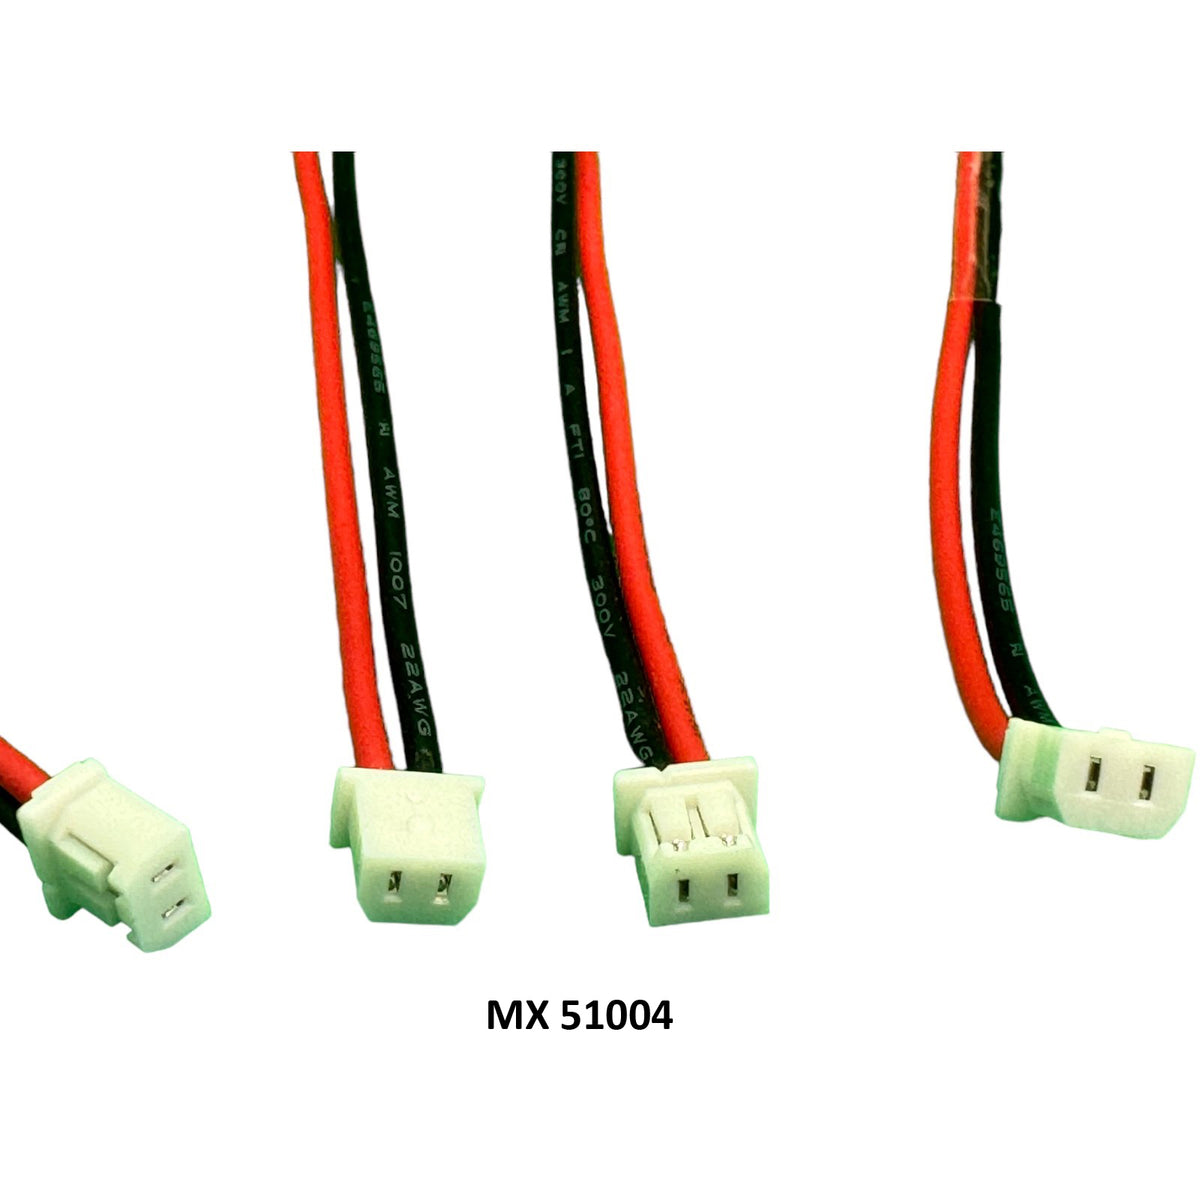 1S 3.7V 3400mAh Li-ion battery with MX 51004 2mm 2pin connector